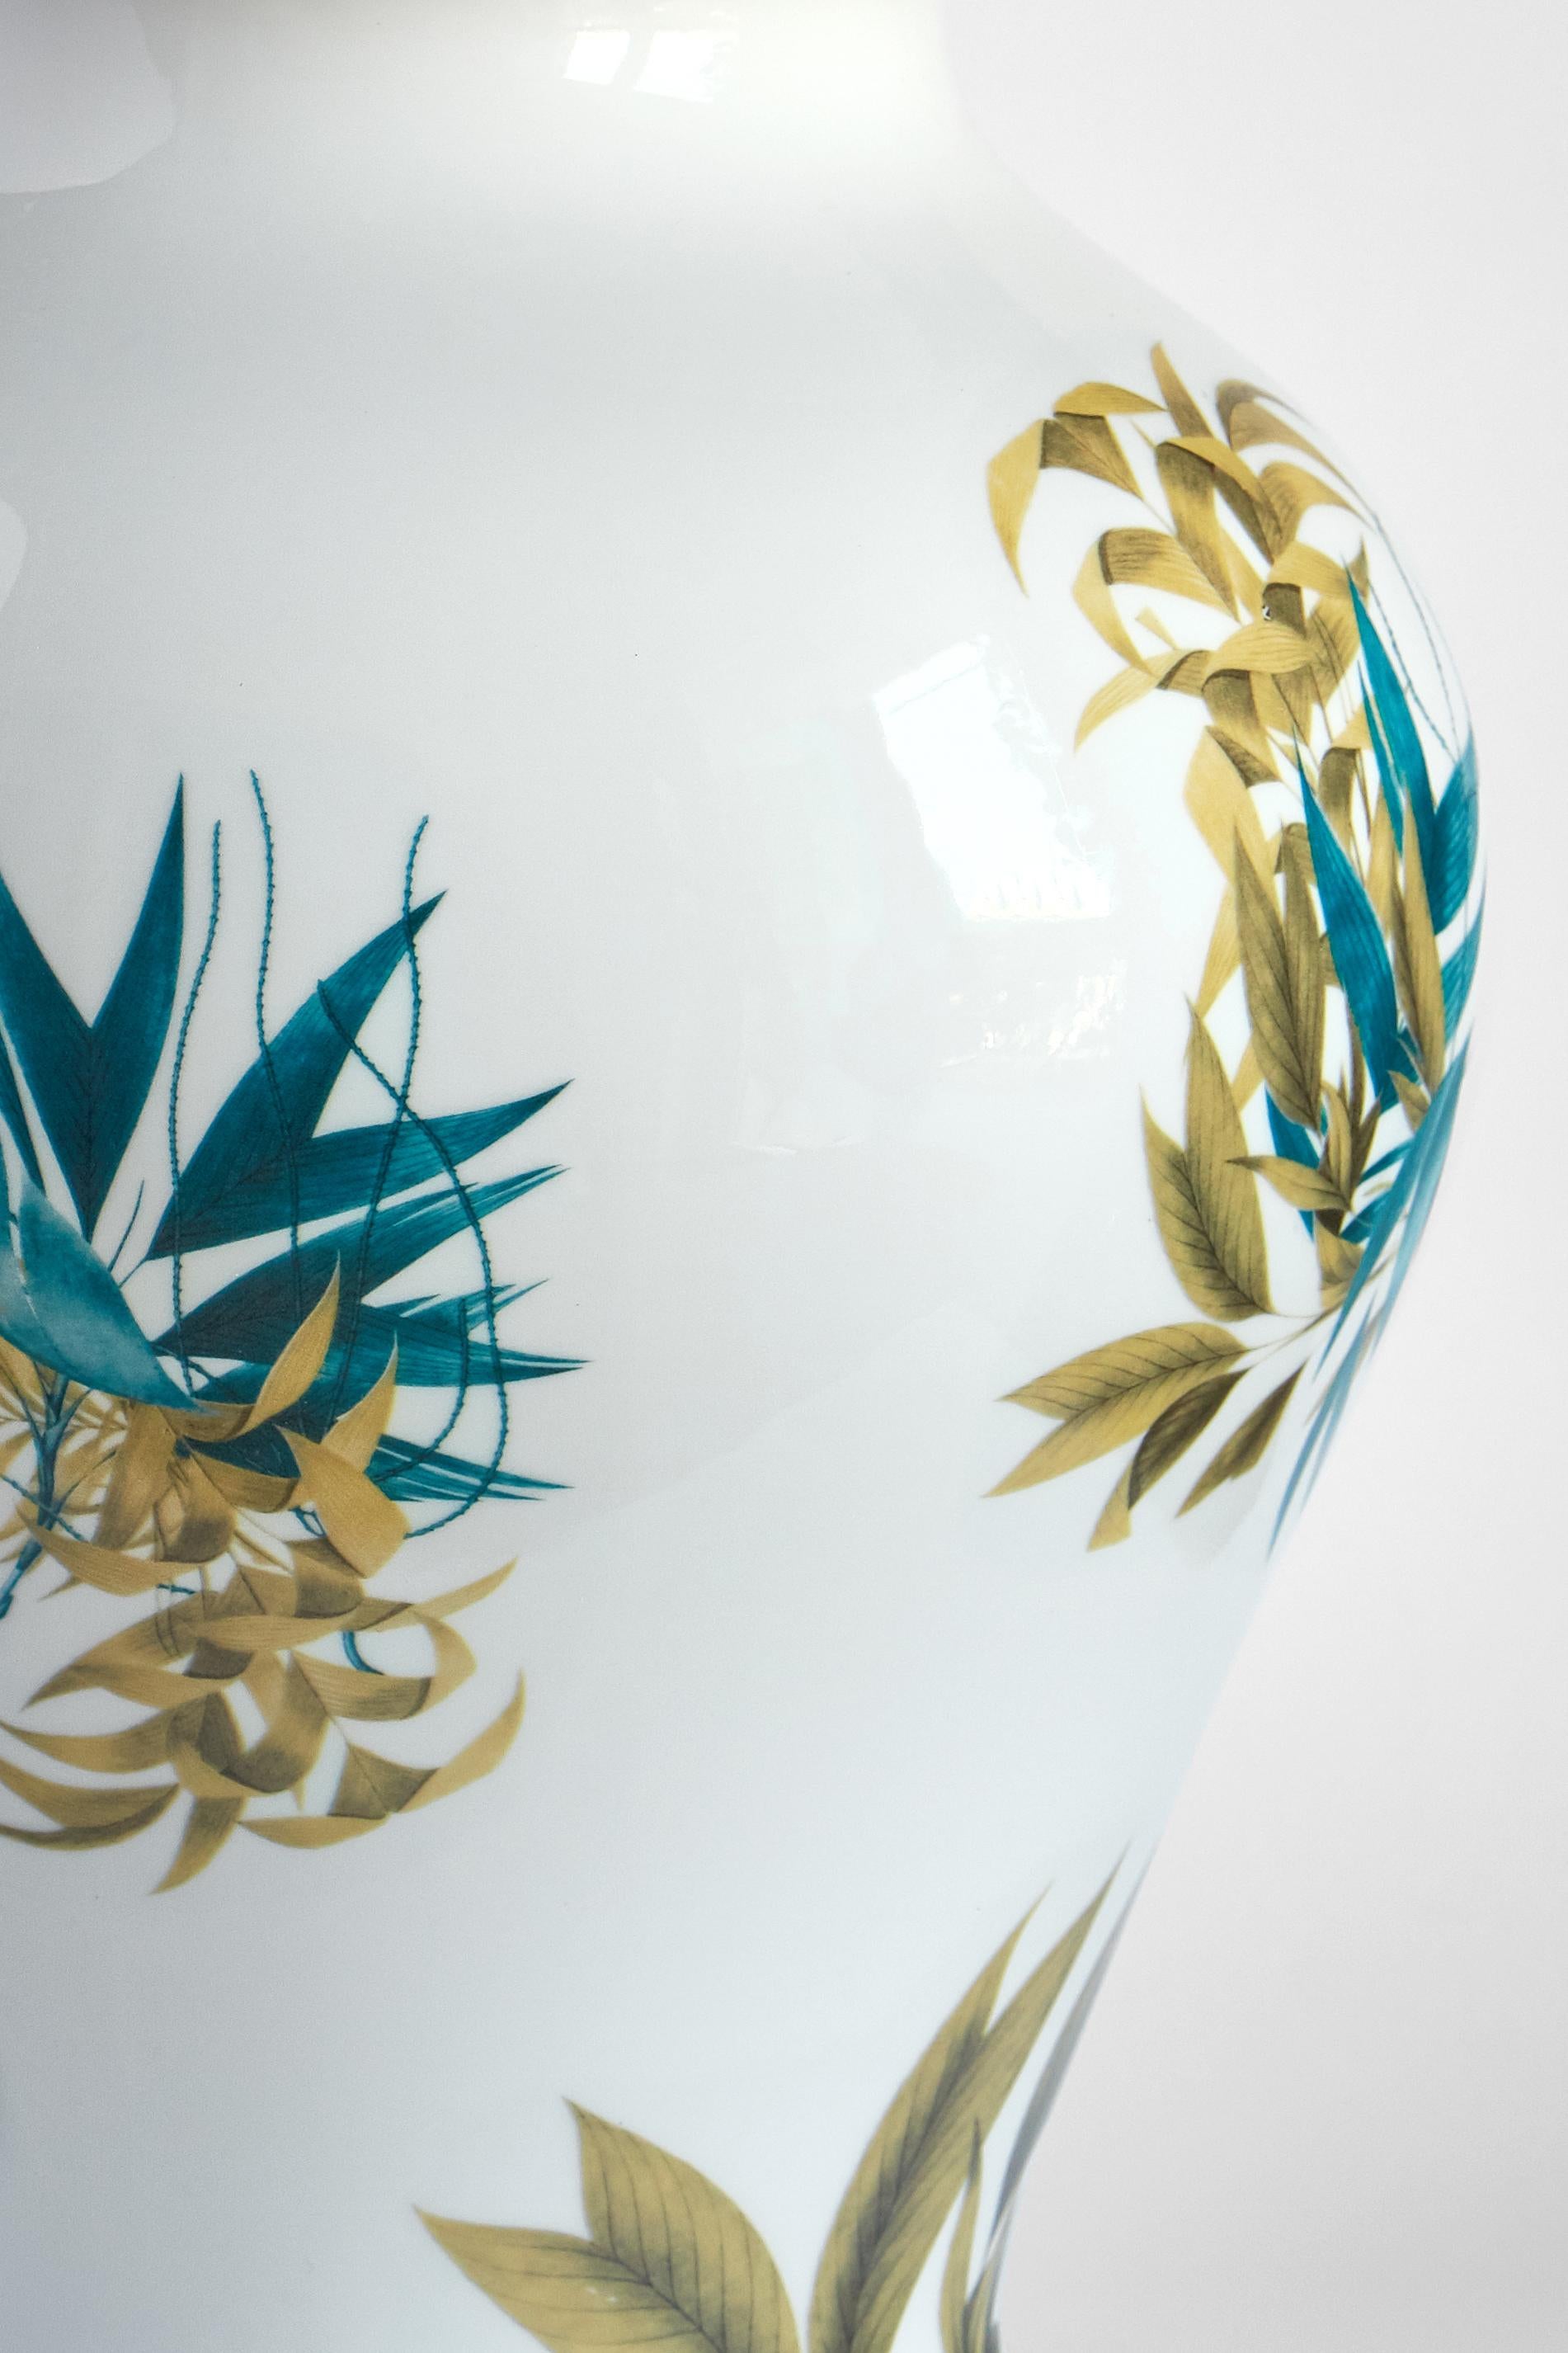 The classic design of this porcelain vase comes back to life with retro decorations with a contemporary flavor. Teal and ocher palm leaves spread out on the surface of this precious vase.